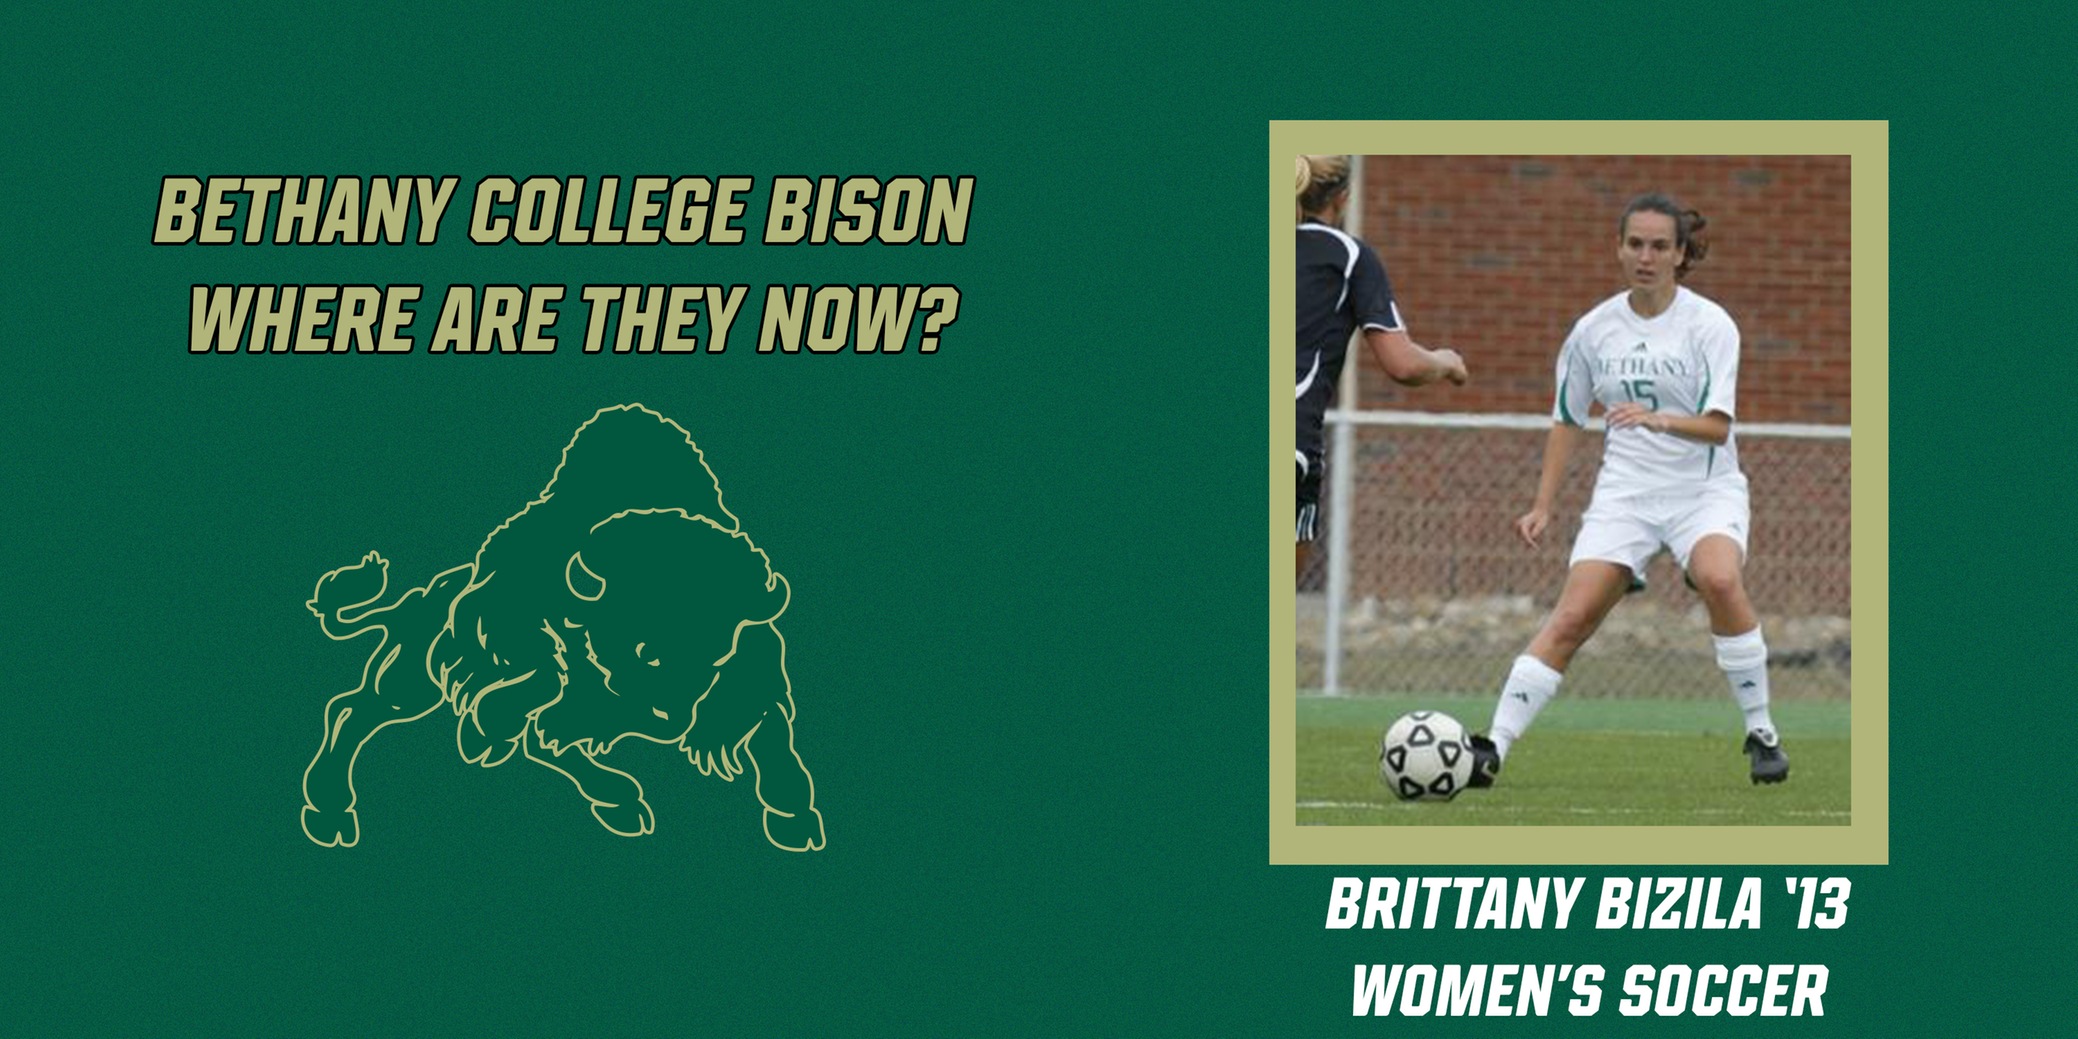 Where Are They Now Series - Brittany Bizila '13, Women's Soccer